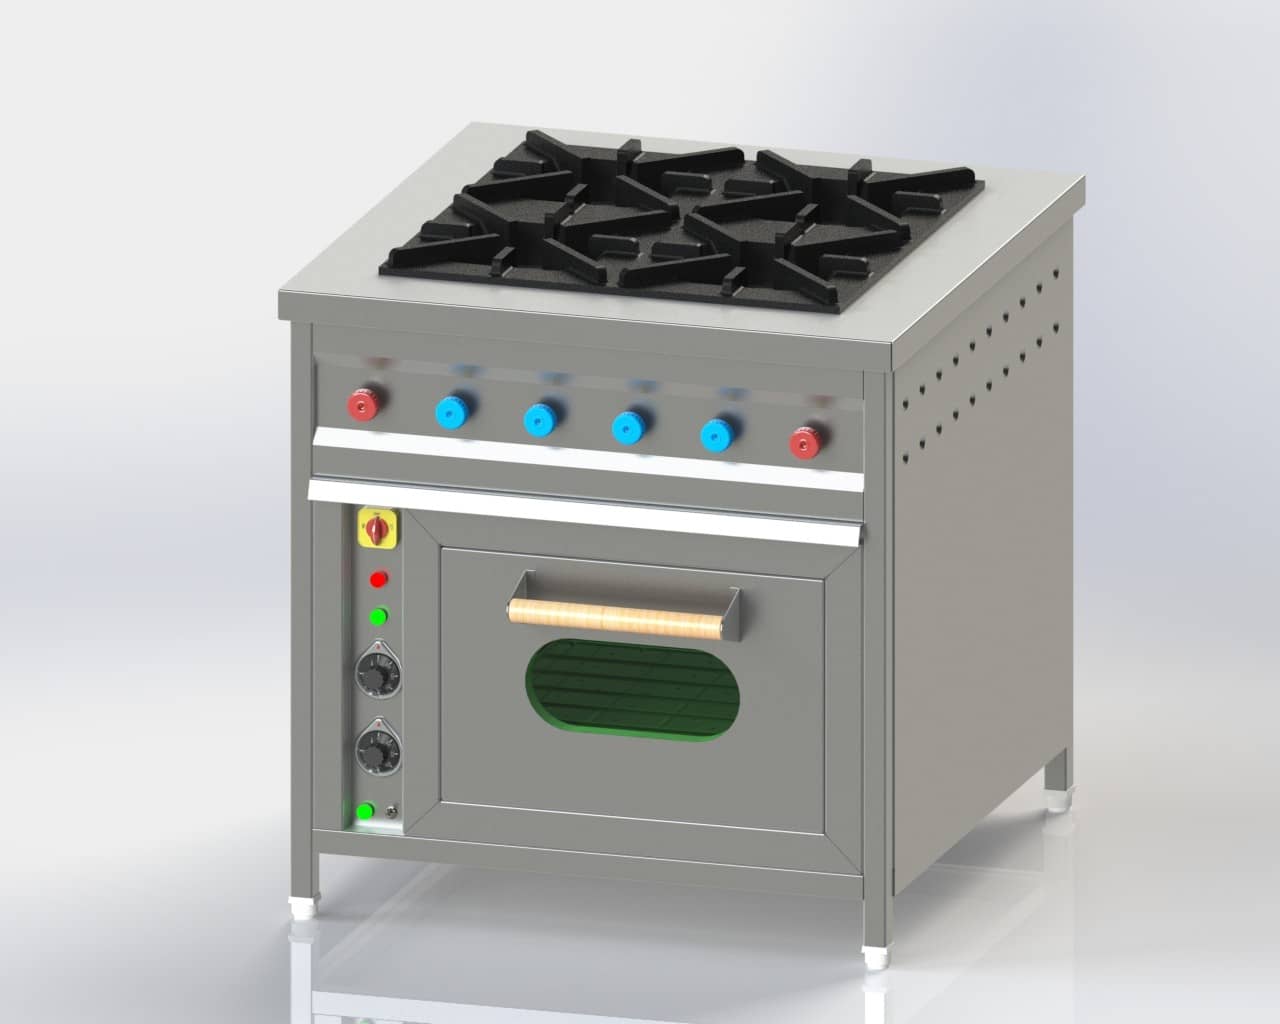 Four Burner with Below oven for cooking in commercial kitchen